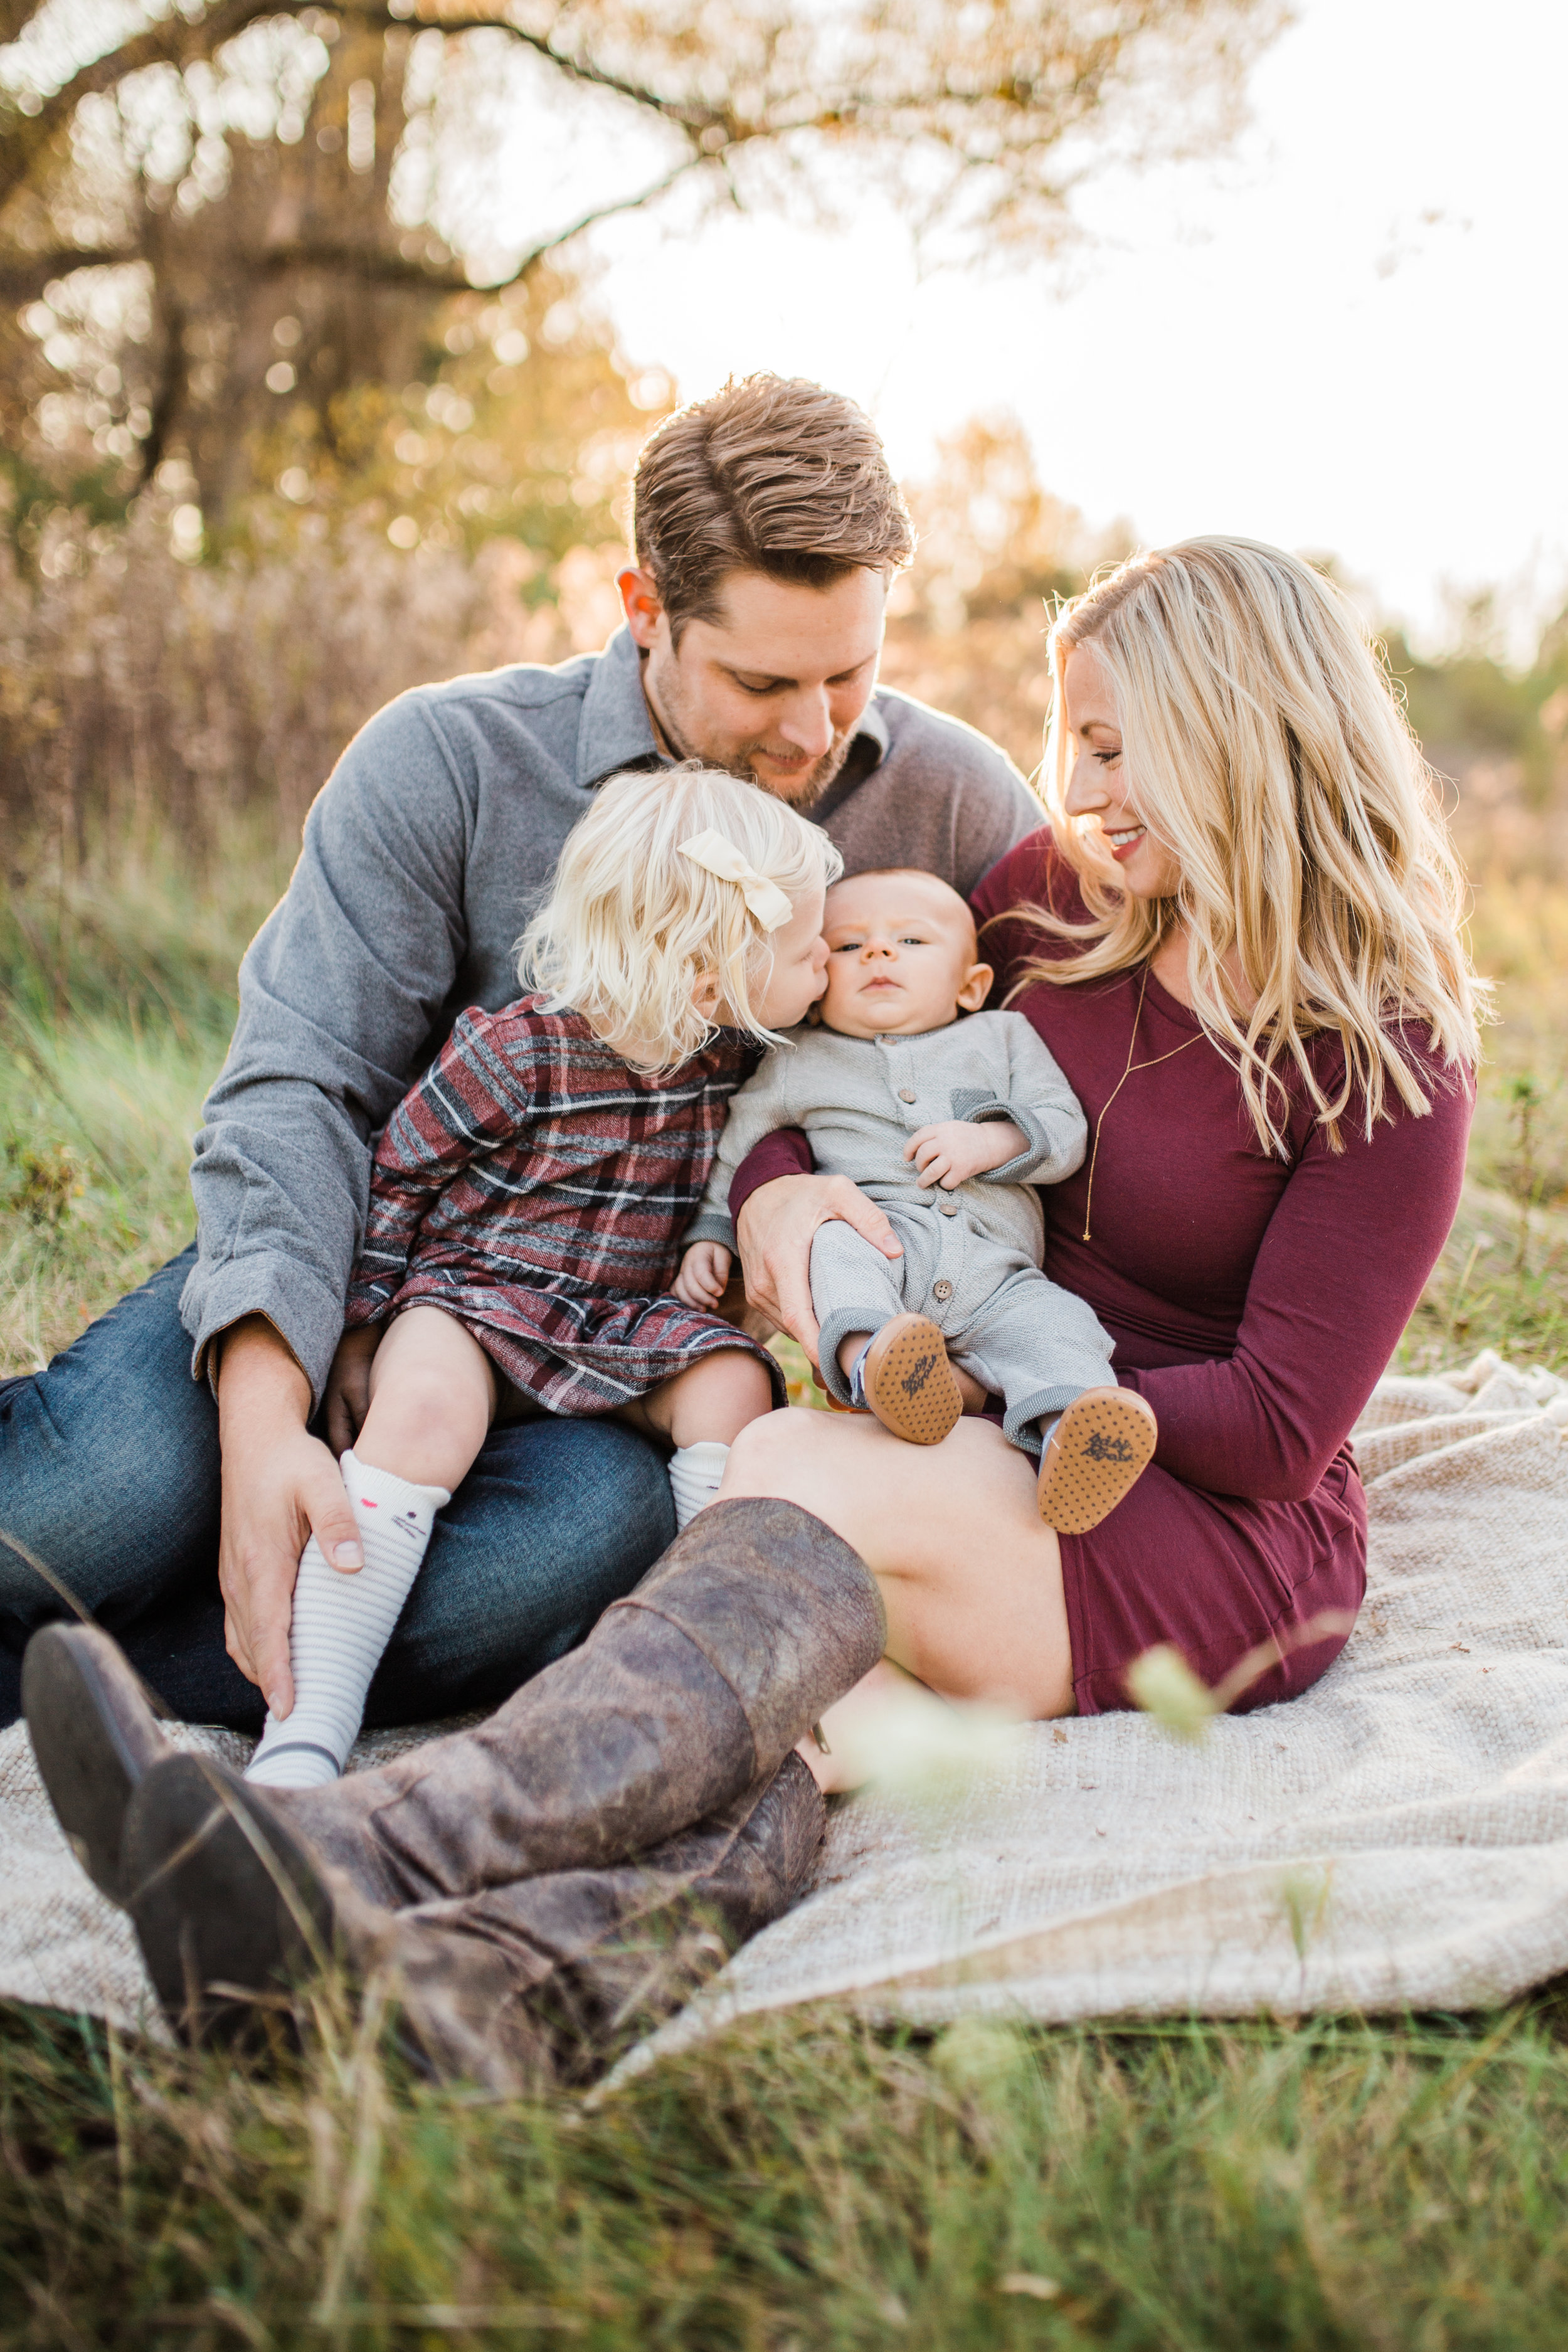 thoele-fall-family-photography-delafield-wisconsin